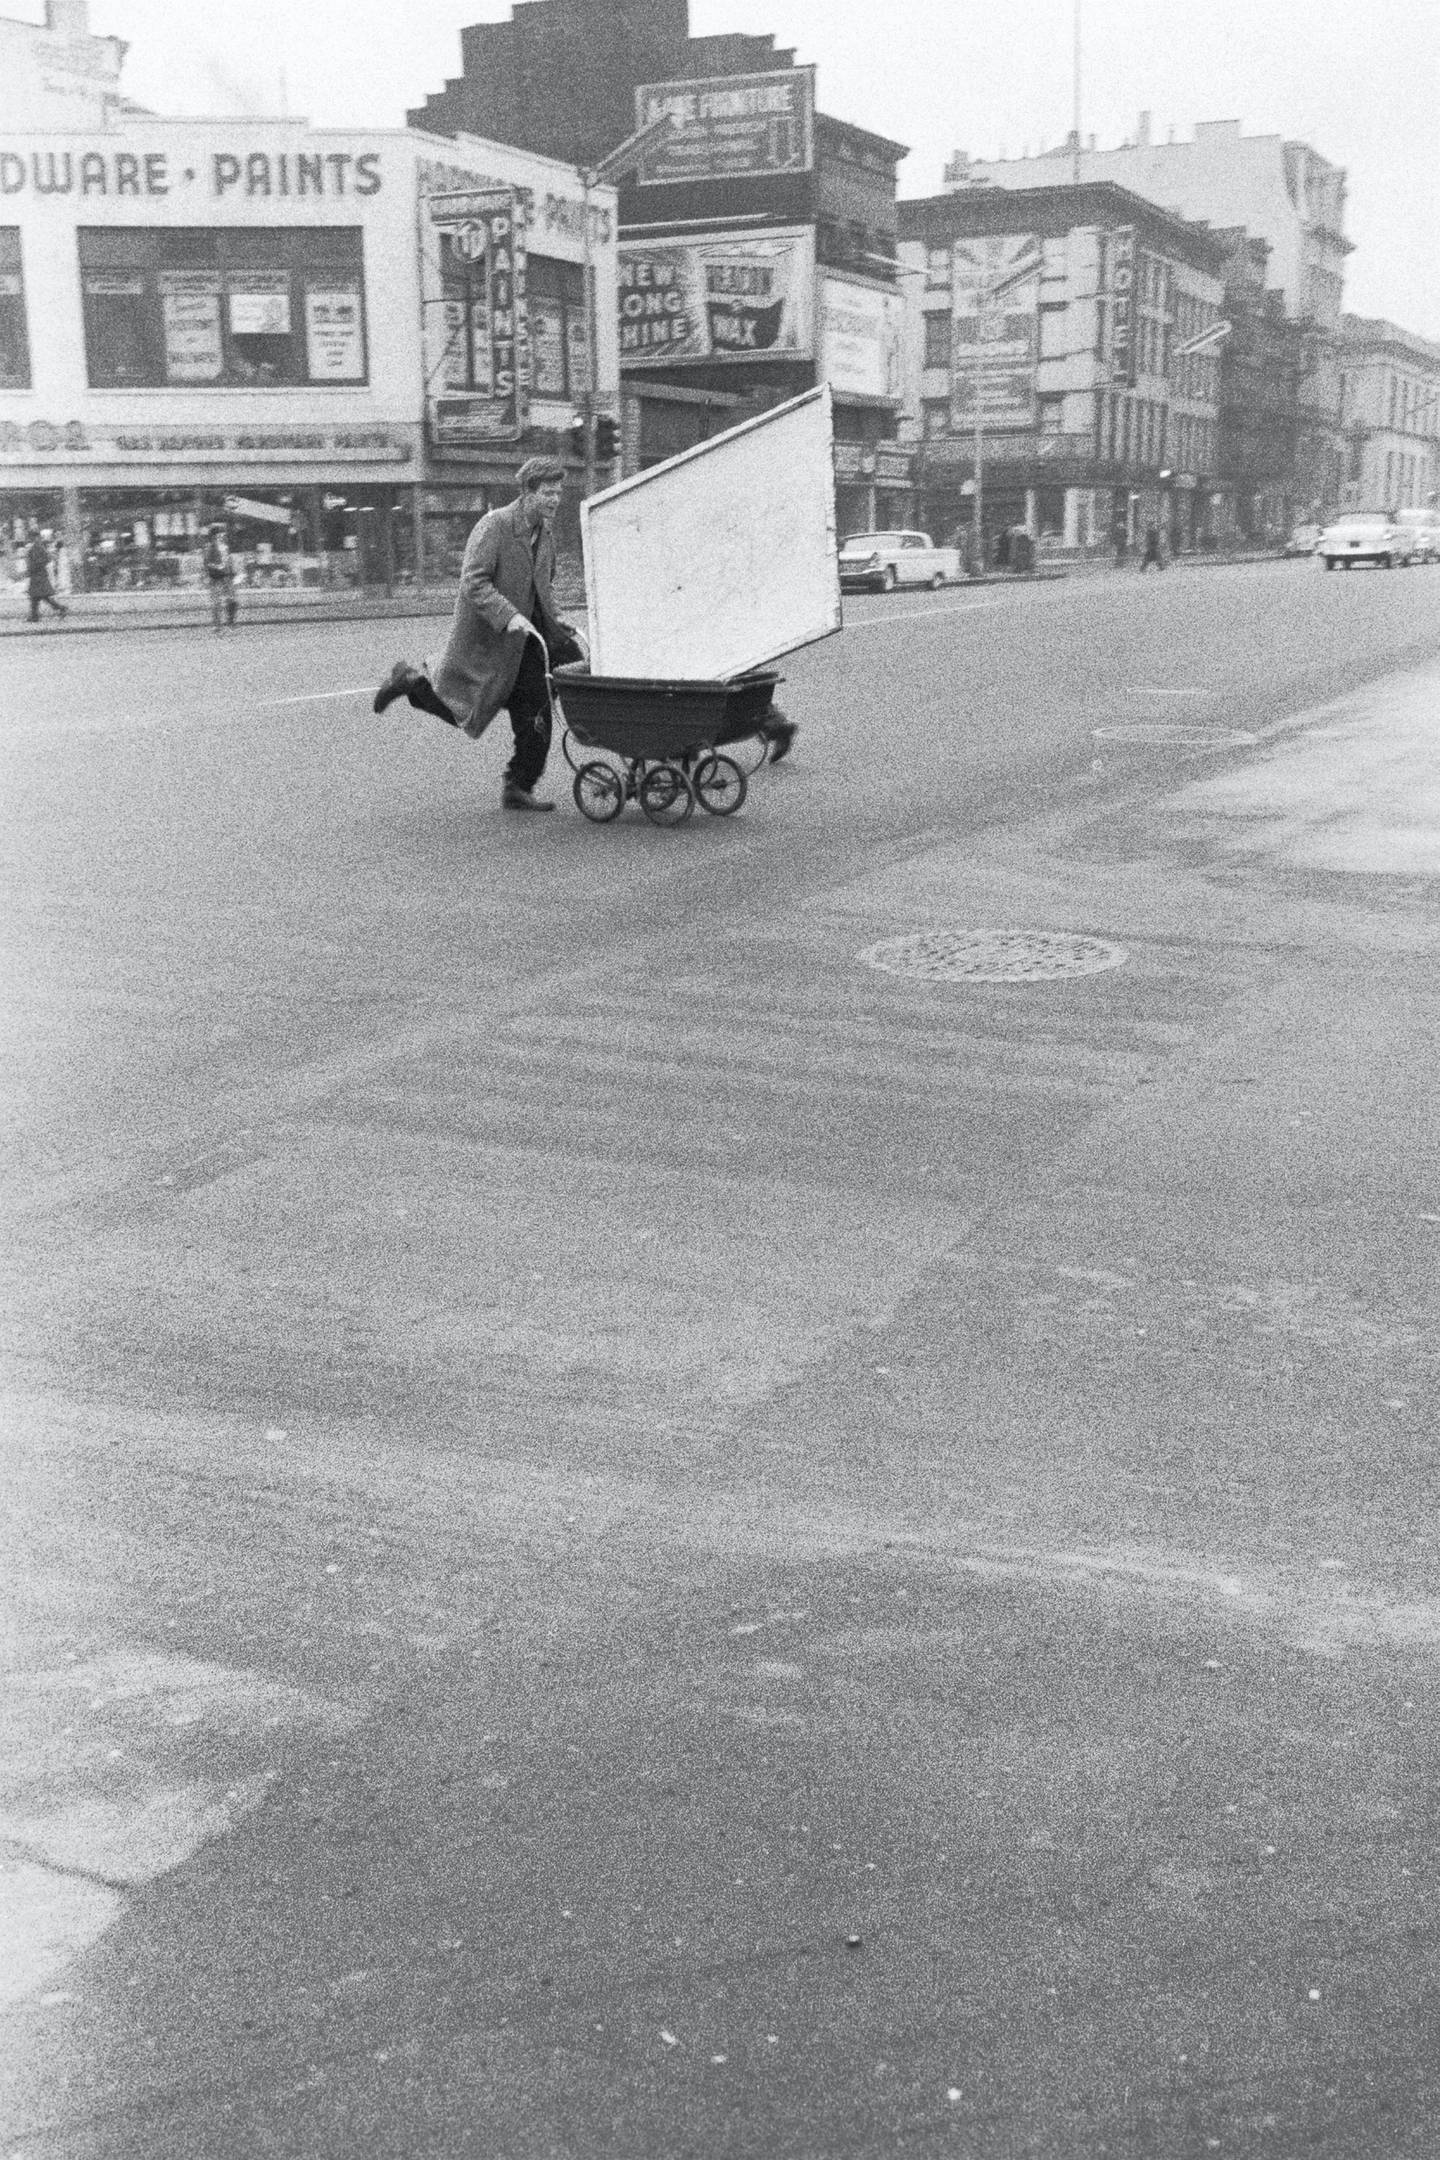 Red Grooms transporting artwork to Reuben Gallery, New York (1960) by John Cohen. Courtesy L. Parker Stephenson Photographs